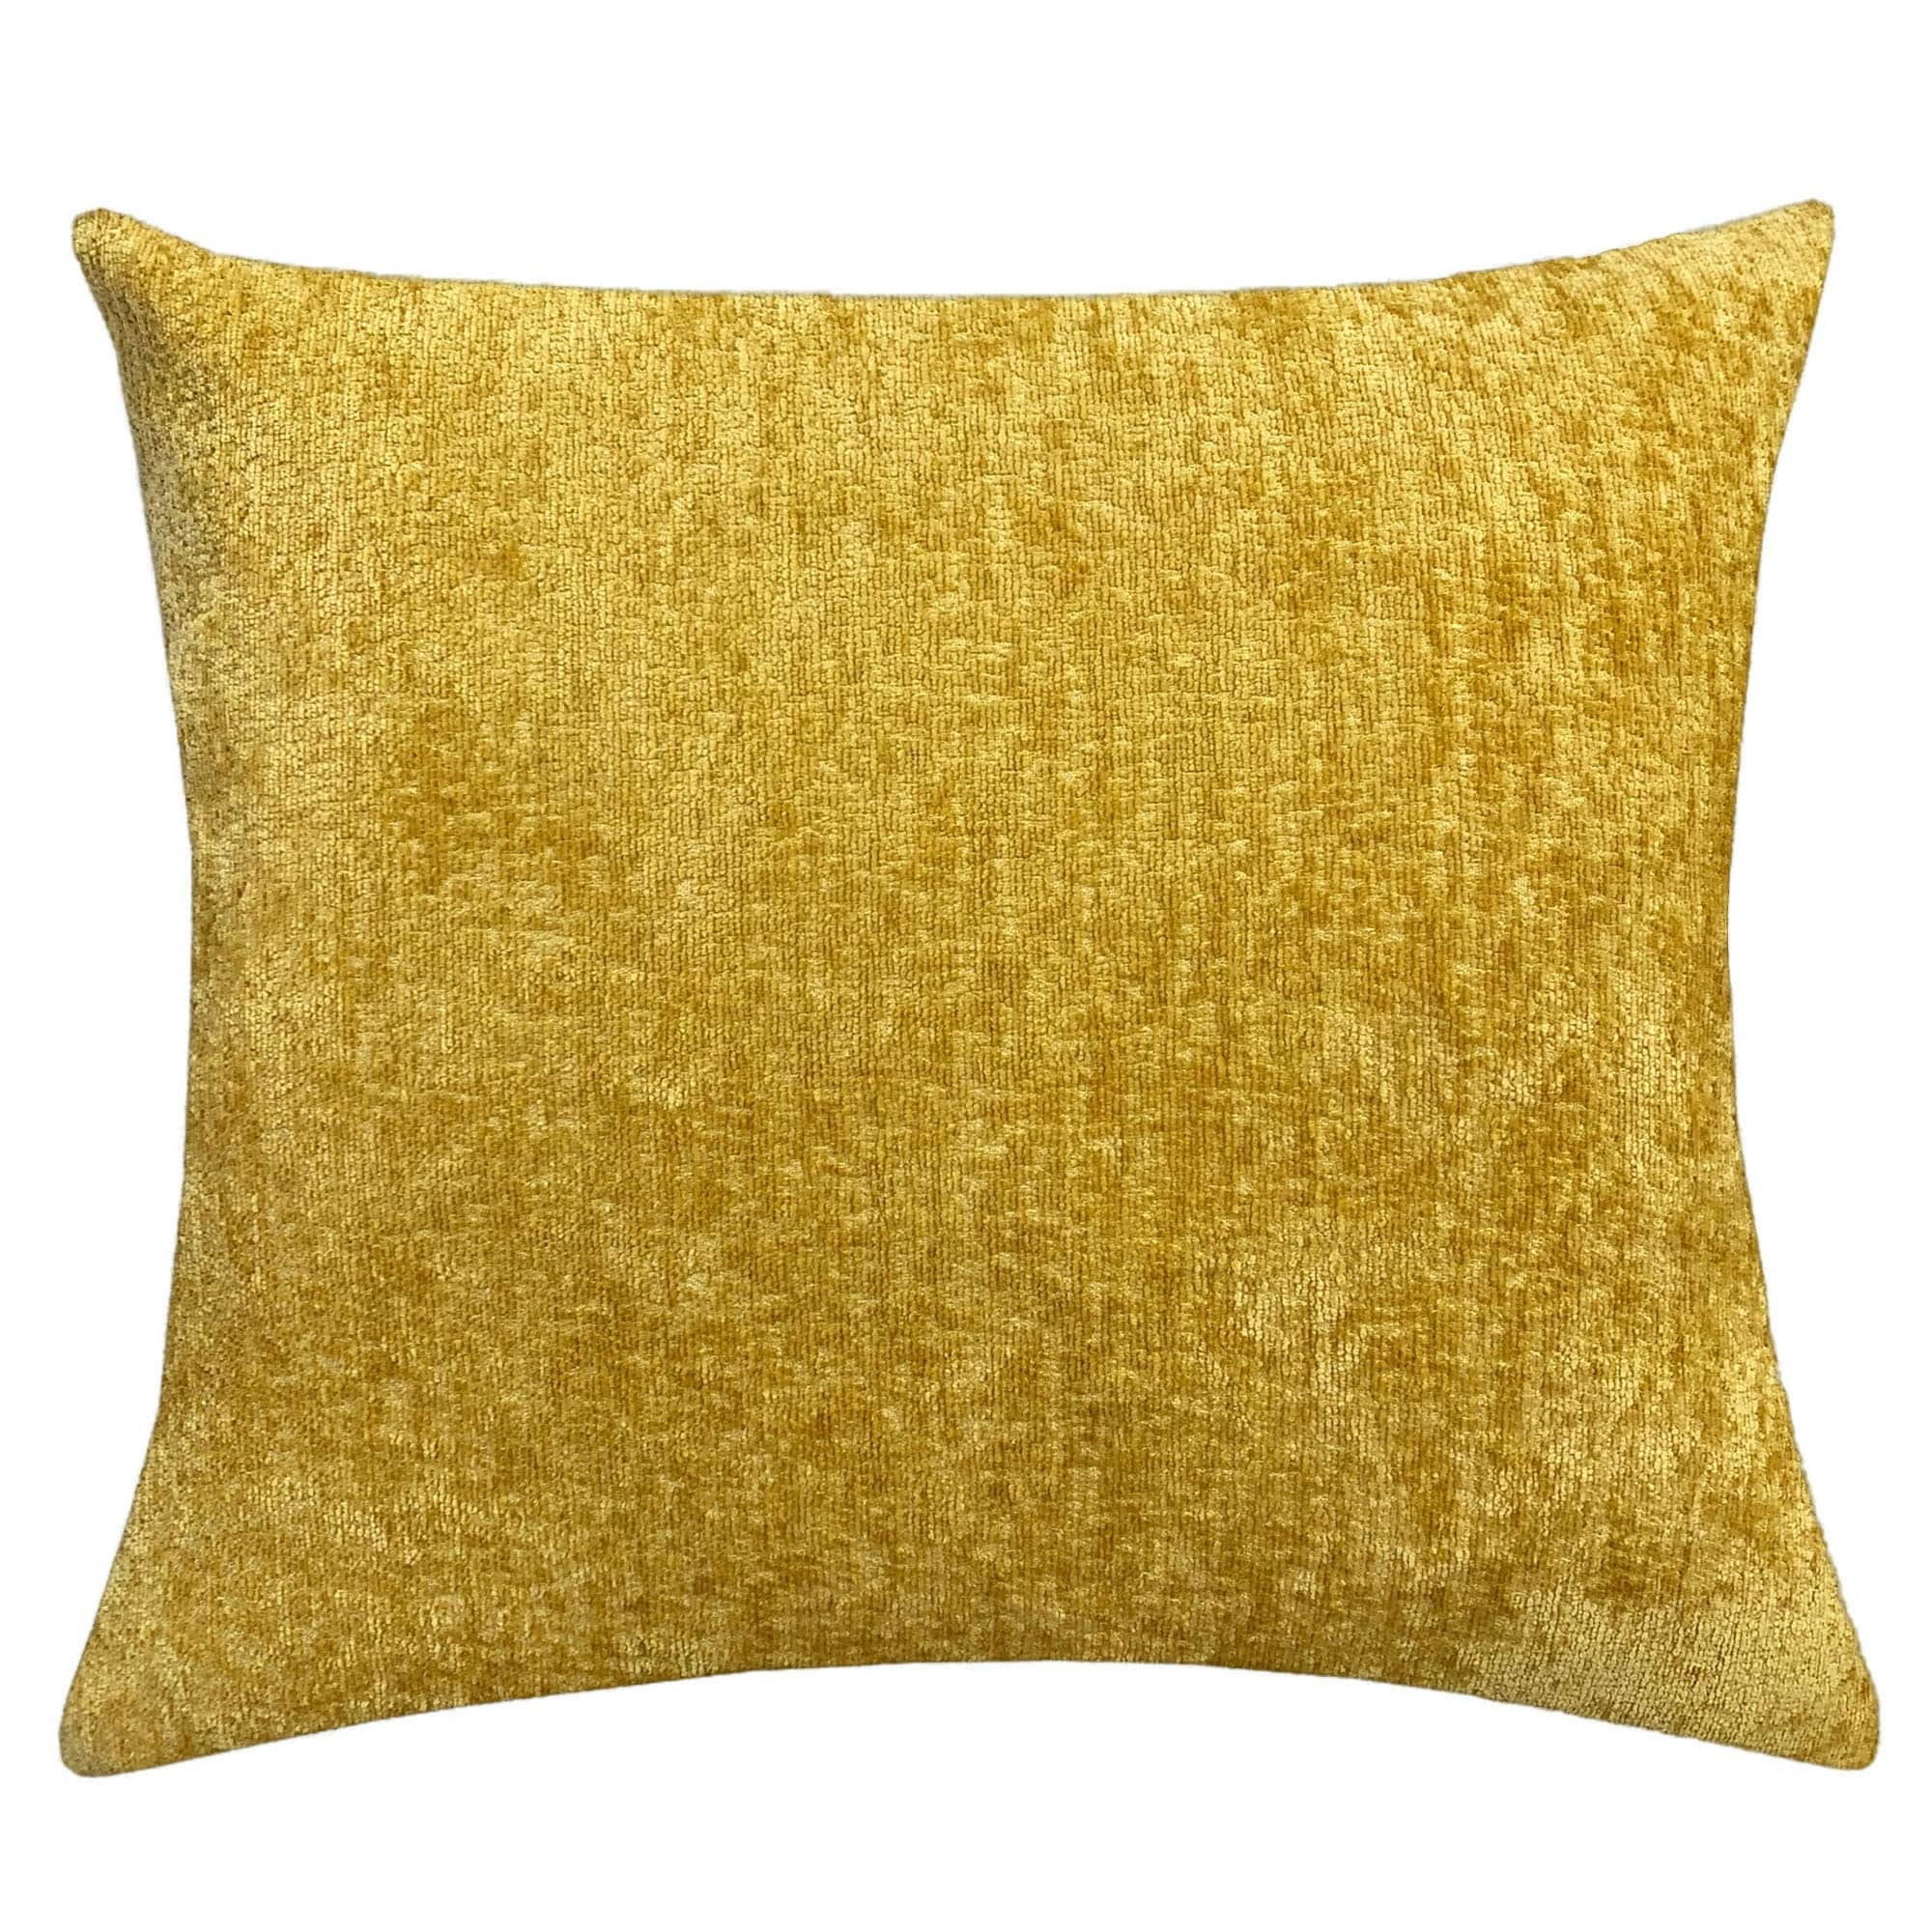 https://ak1.ostkcdn.com/images/products/is/images/direct/e0d979a0c9ba5b0ddc3433ceee17edc68f35d203/Rodeo-Home-Samson-Decorative-Solid-Color-Chenille-Rectangular-Throw-Pillow.jpg